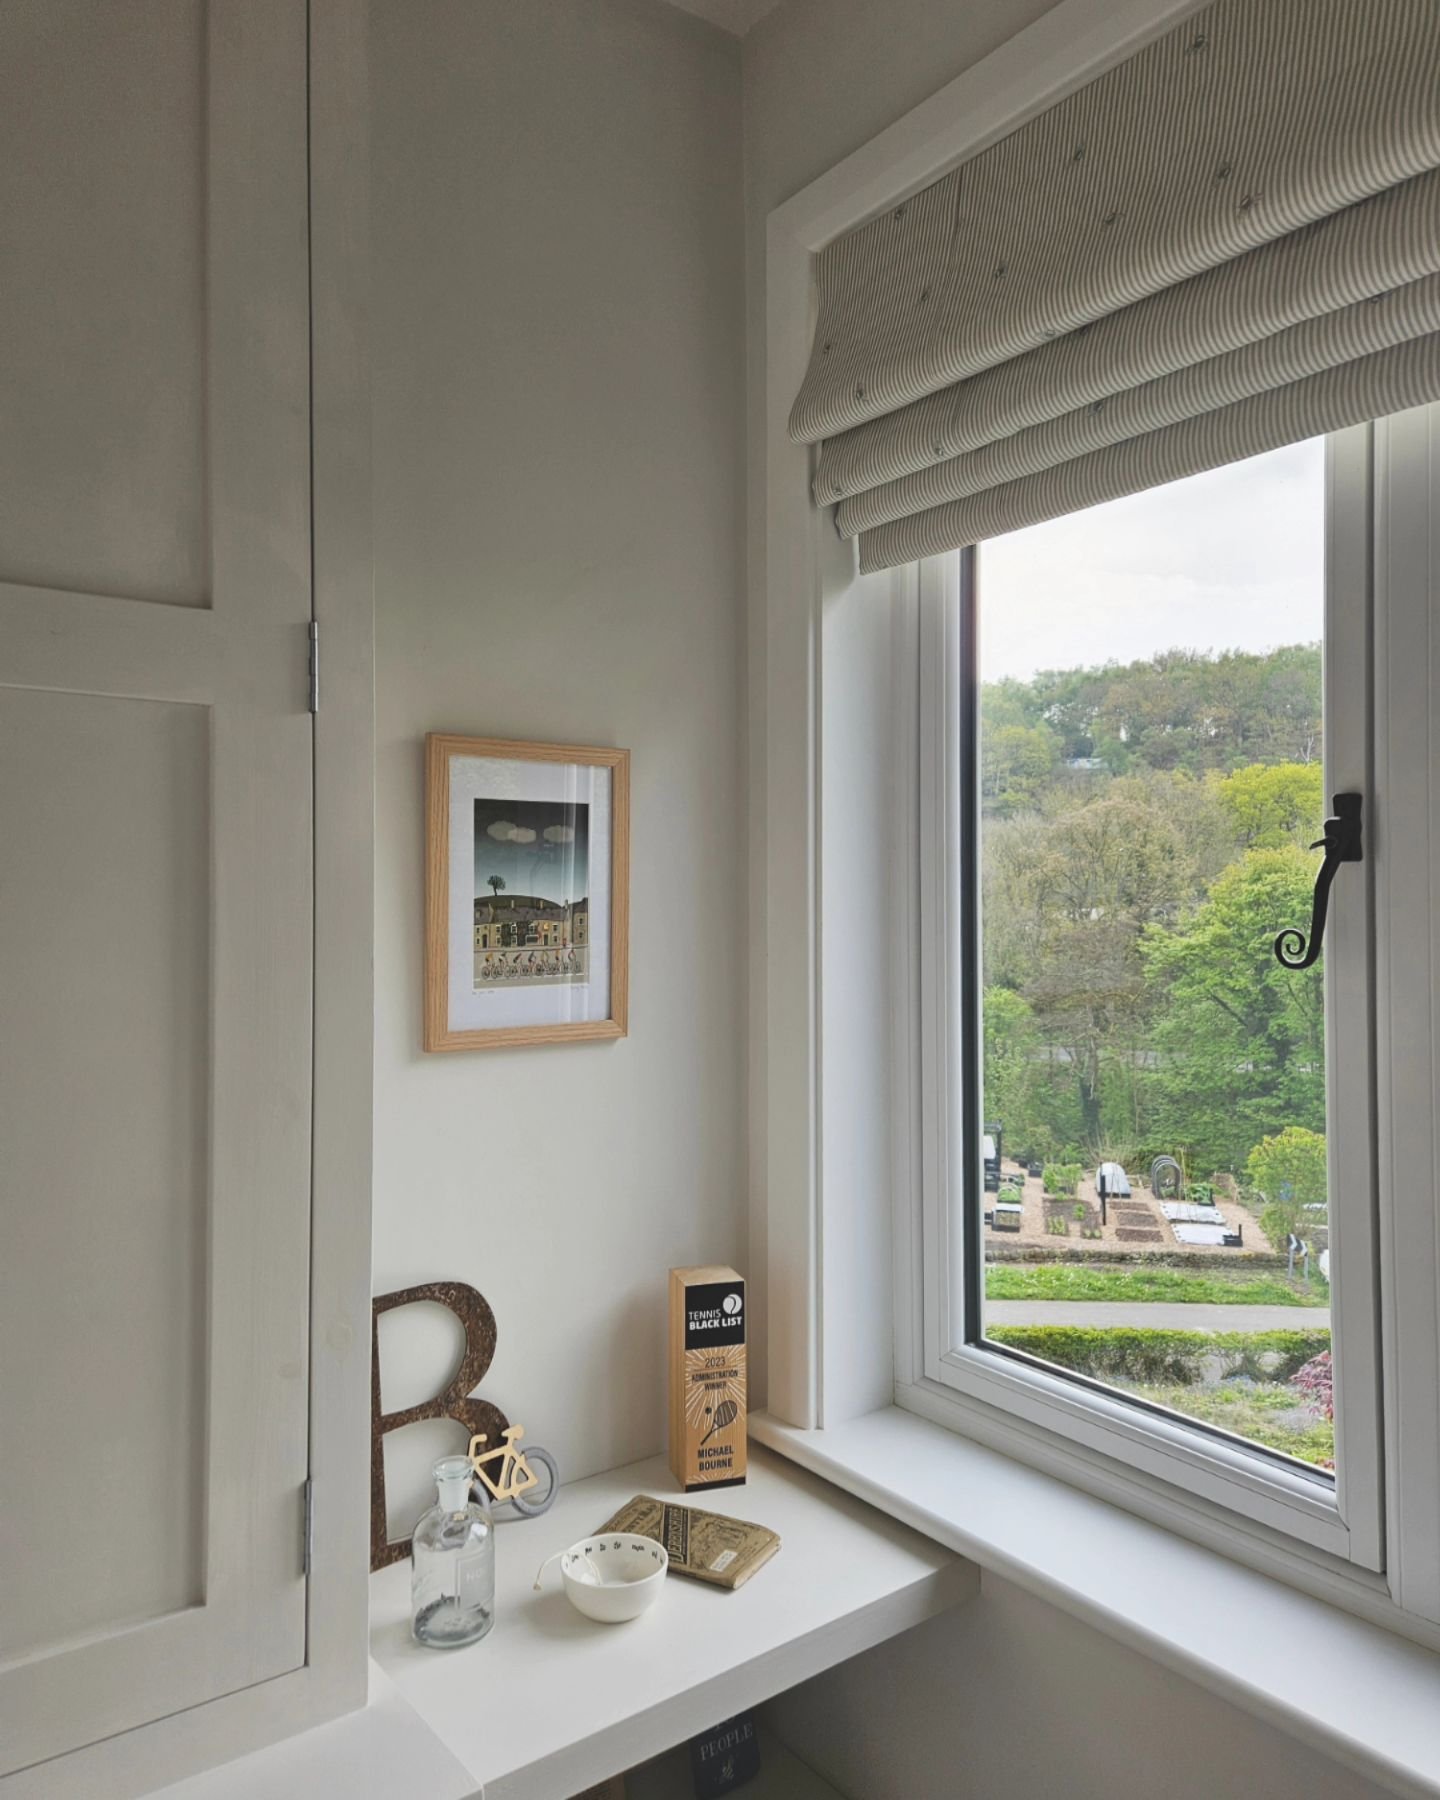 - V I E W -

This is my new little favourite corner in our office. To think this was once a built-in vanity unit of the old bathroom! 

I like to stand here sometimes too &amp; admire the fantastic allotment created over the road. 

Having a lovely w